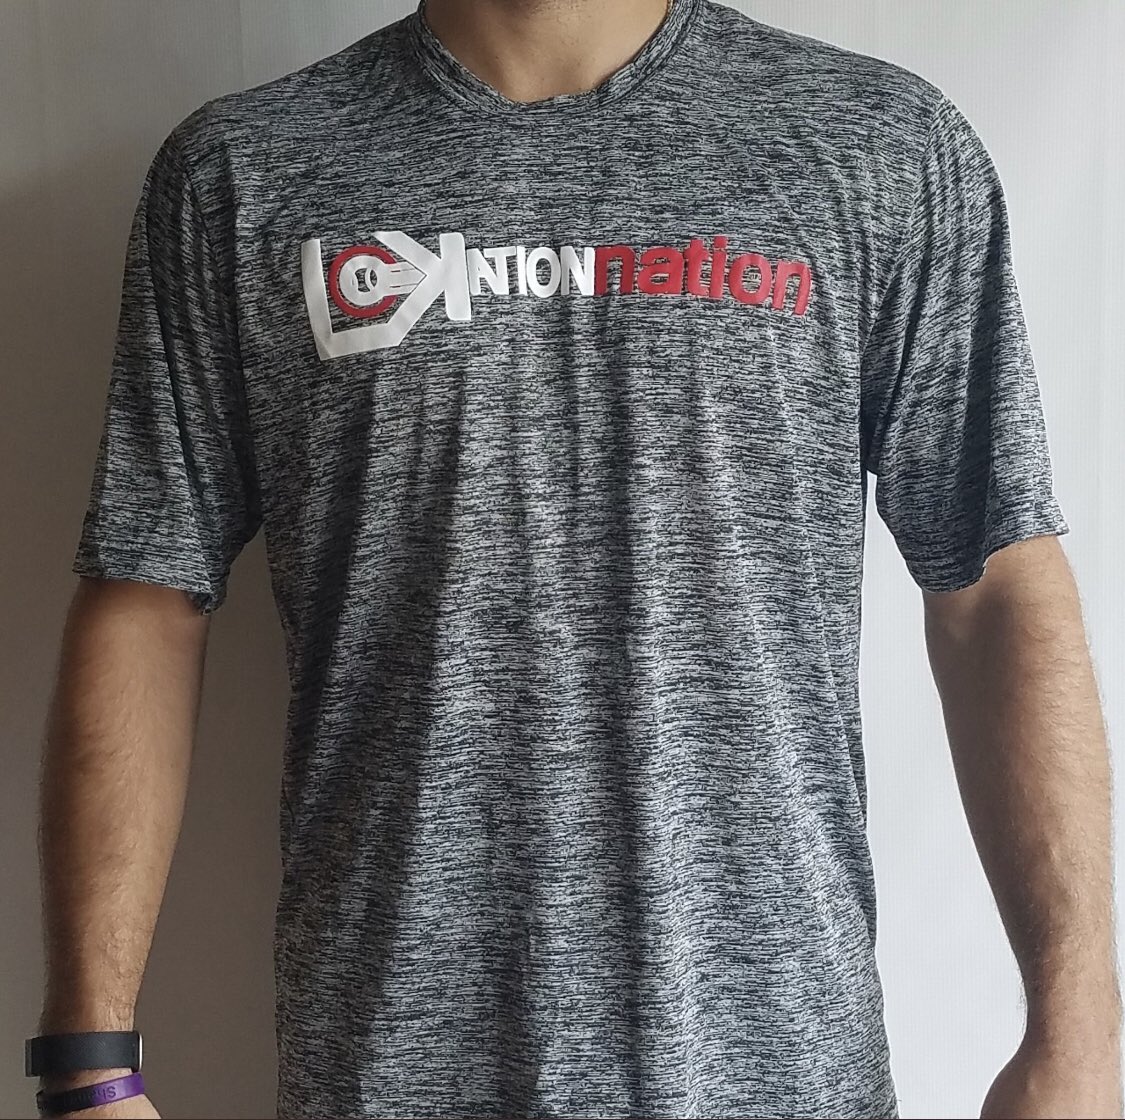 The next athlete who posts a validated video PR velocity that throws a strike & tags @lokationnation gets a FREE Lokation Nation 
T-Shirt. 💪👊✊🎯

#Strikesmatter